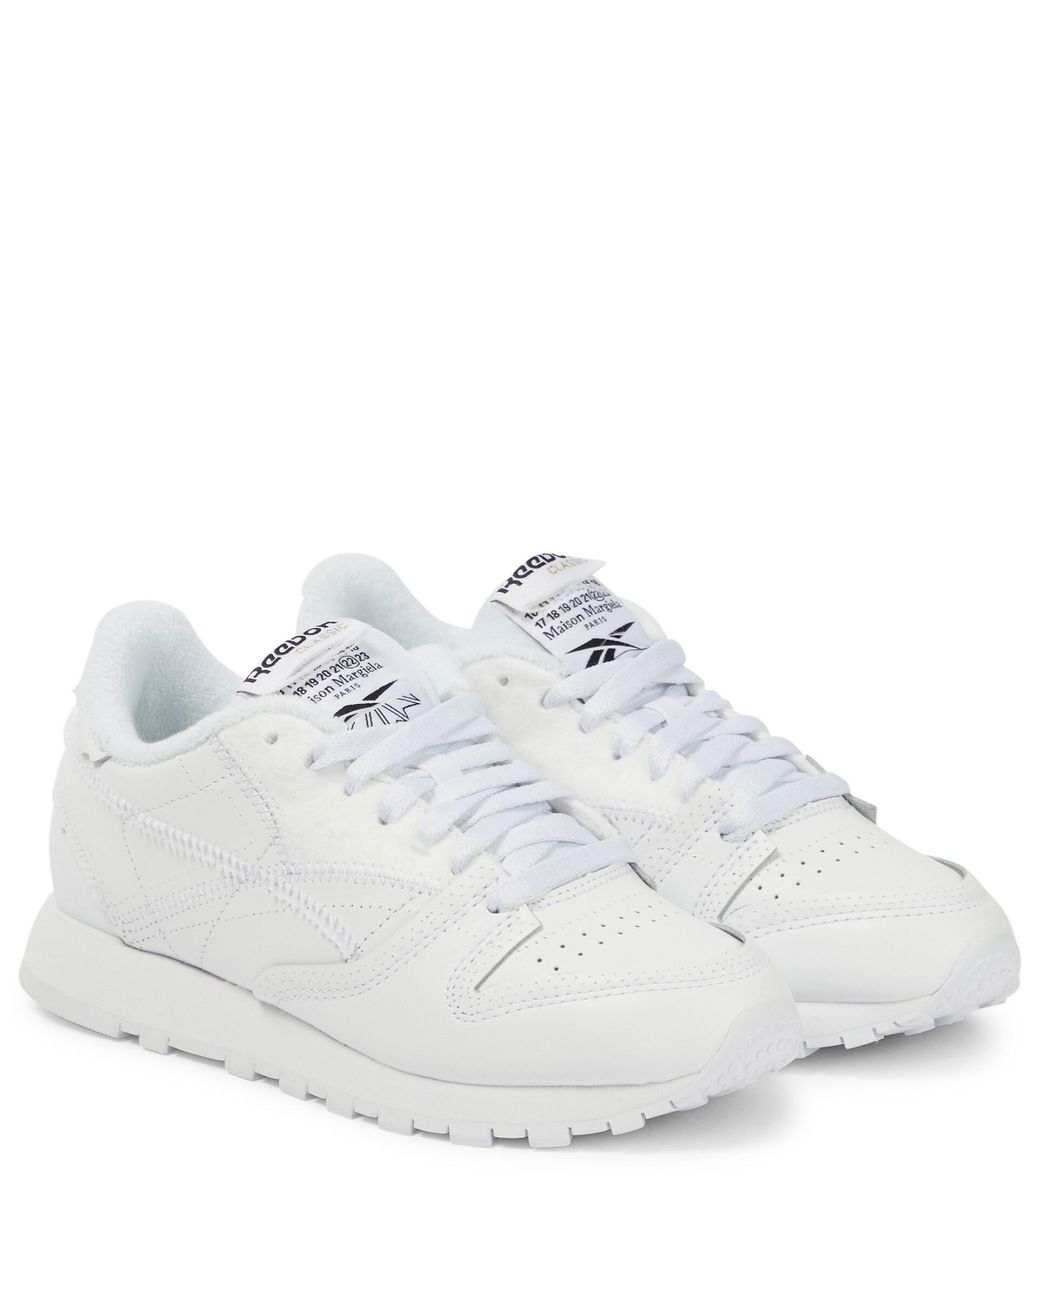 Maison Margiela X Reebok Cl Memory Of Leather Sneakers in White | Lyst